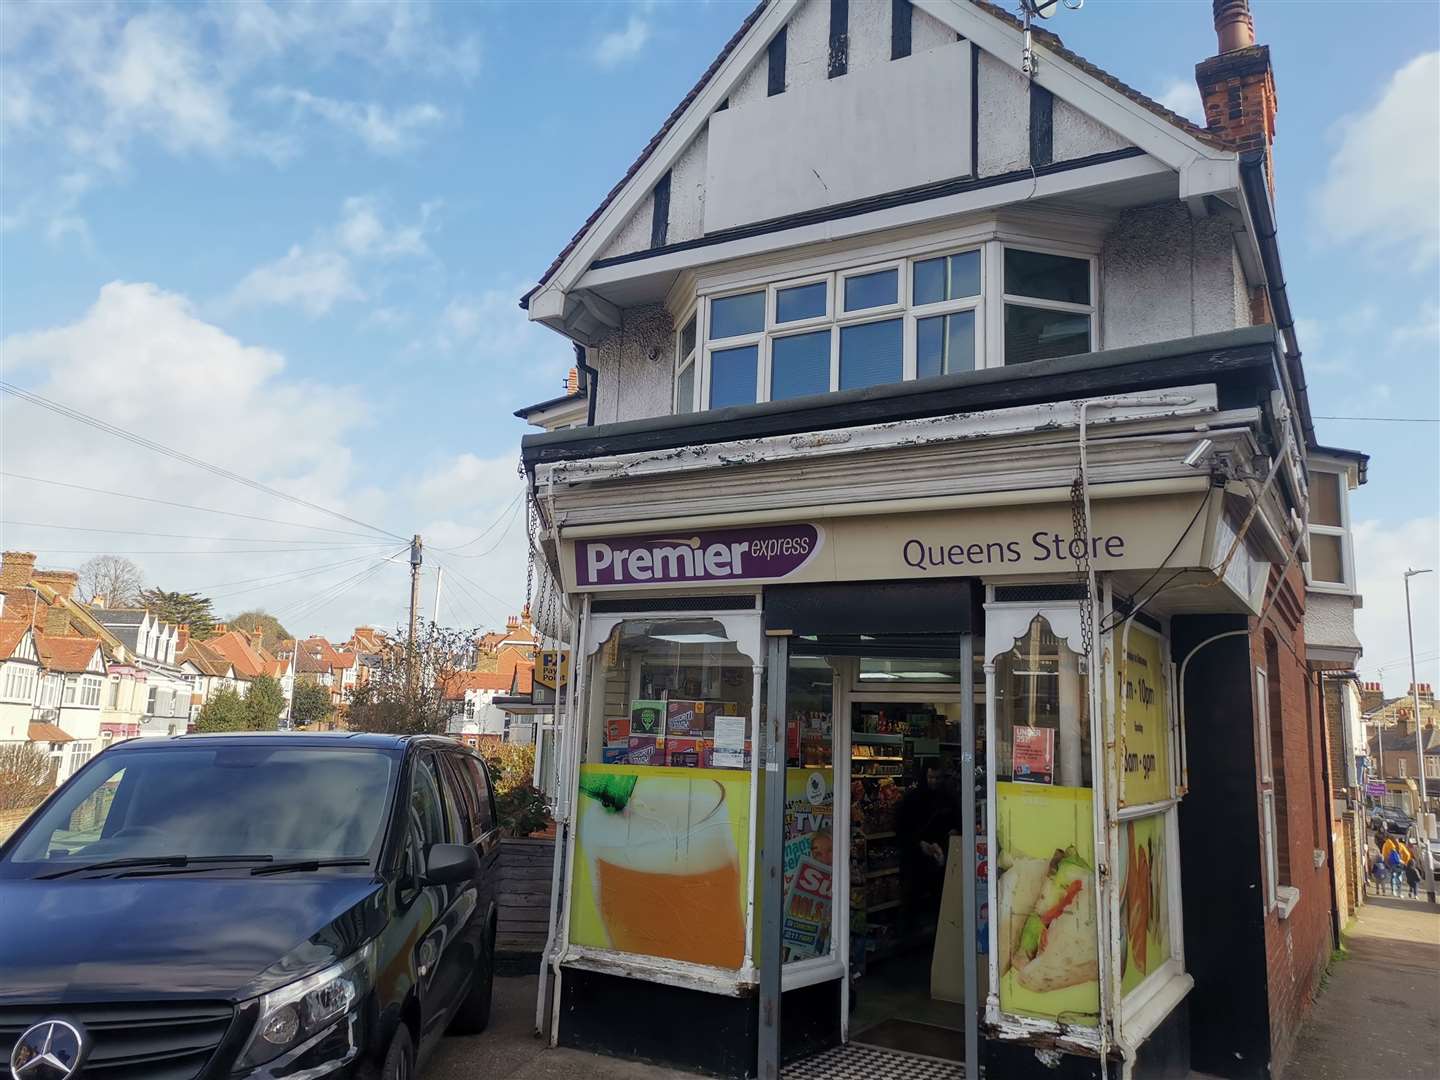 The Premier Express in Queen's Road in Broadstairs was robbed on Tuesday night